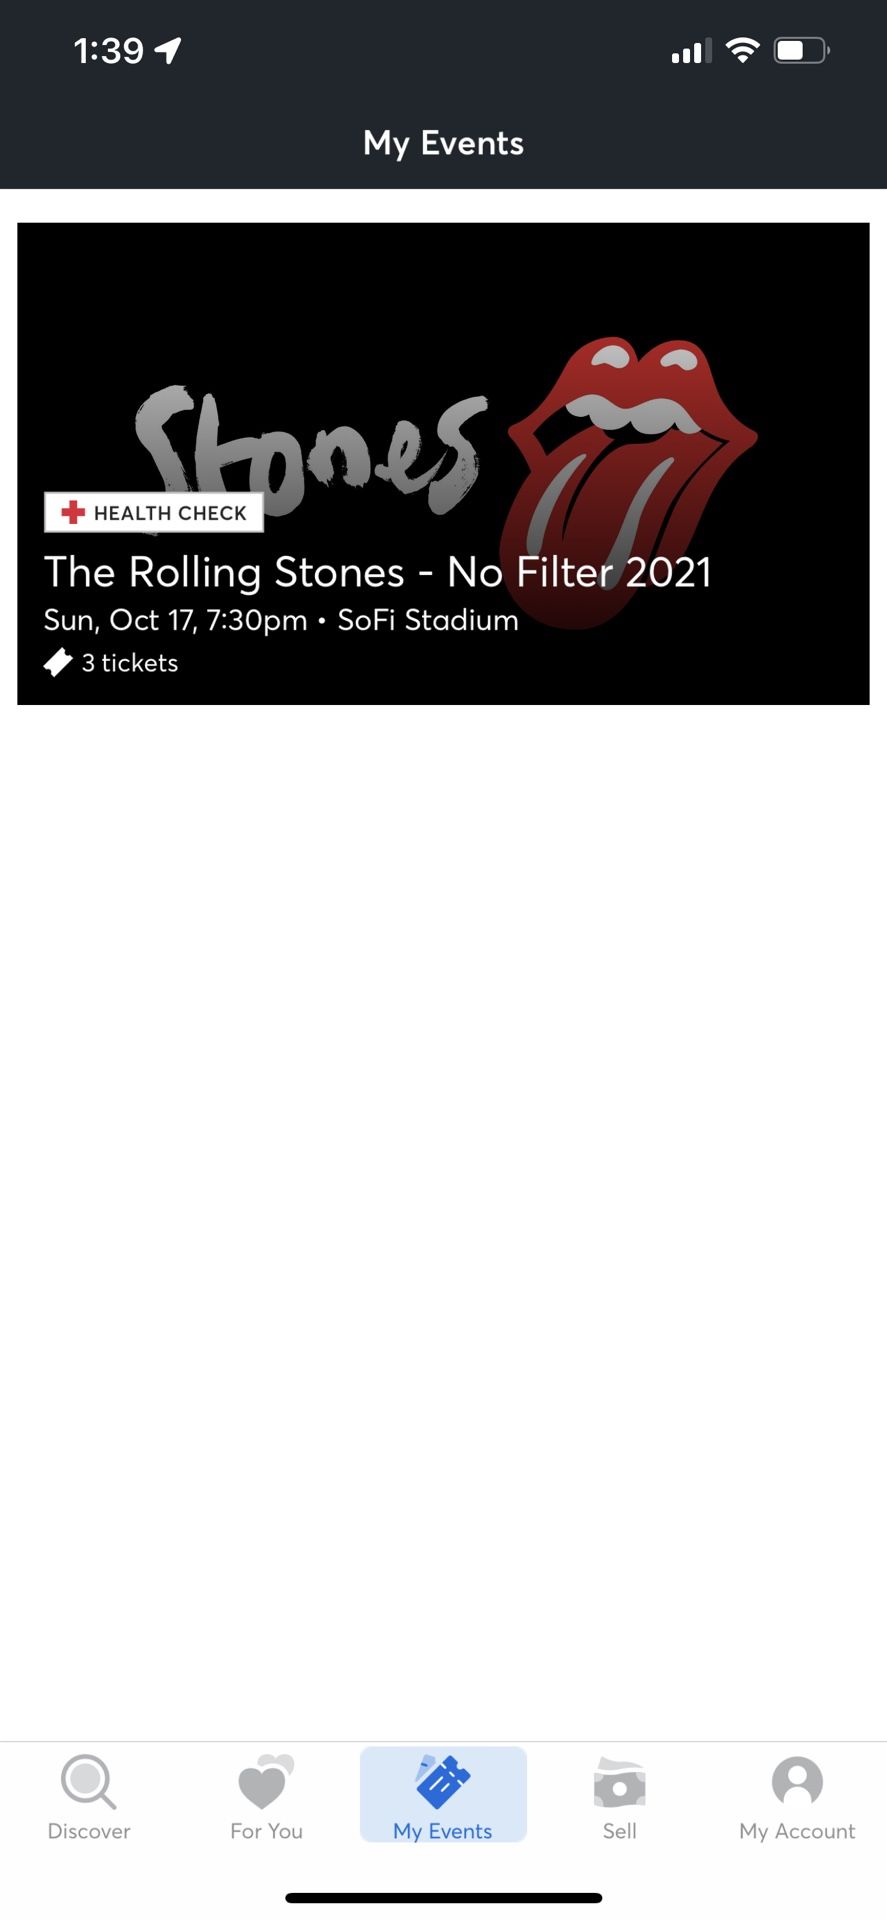 2 Rolling Stones Tickets And Parking Pass!